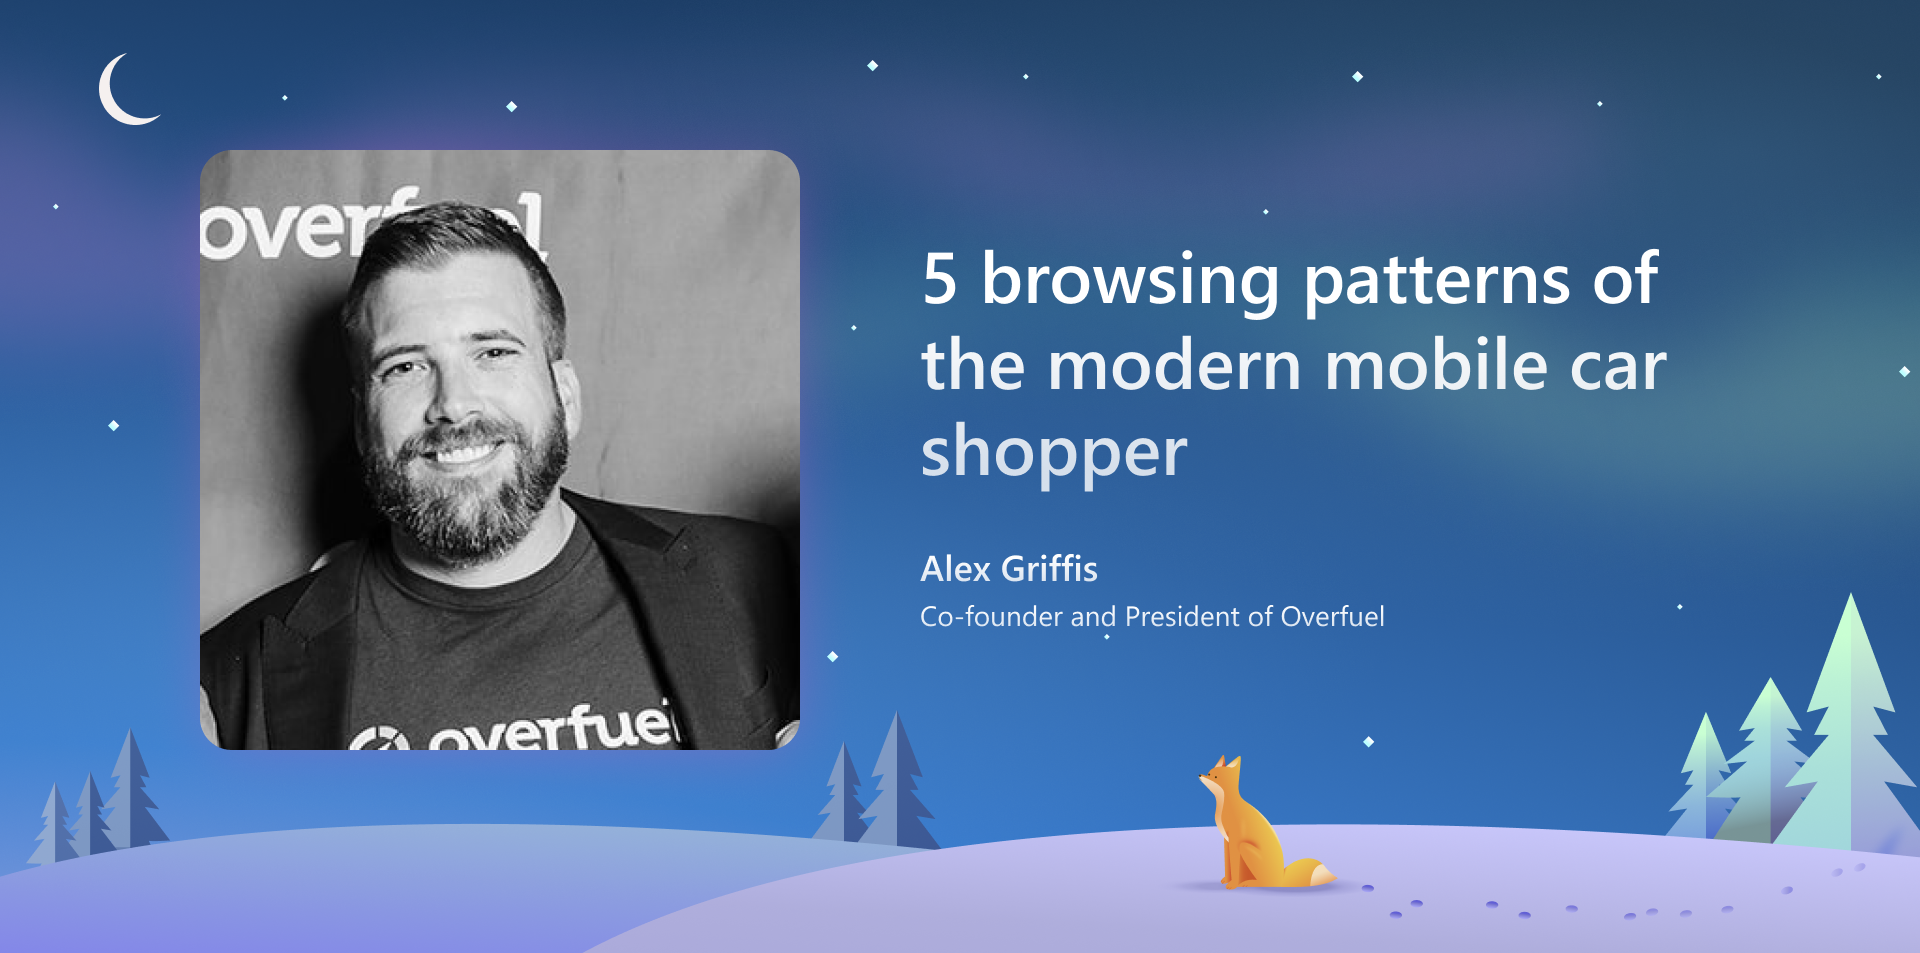 5 Browsing Patterns of the Modern Mobile Car Shopper